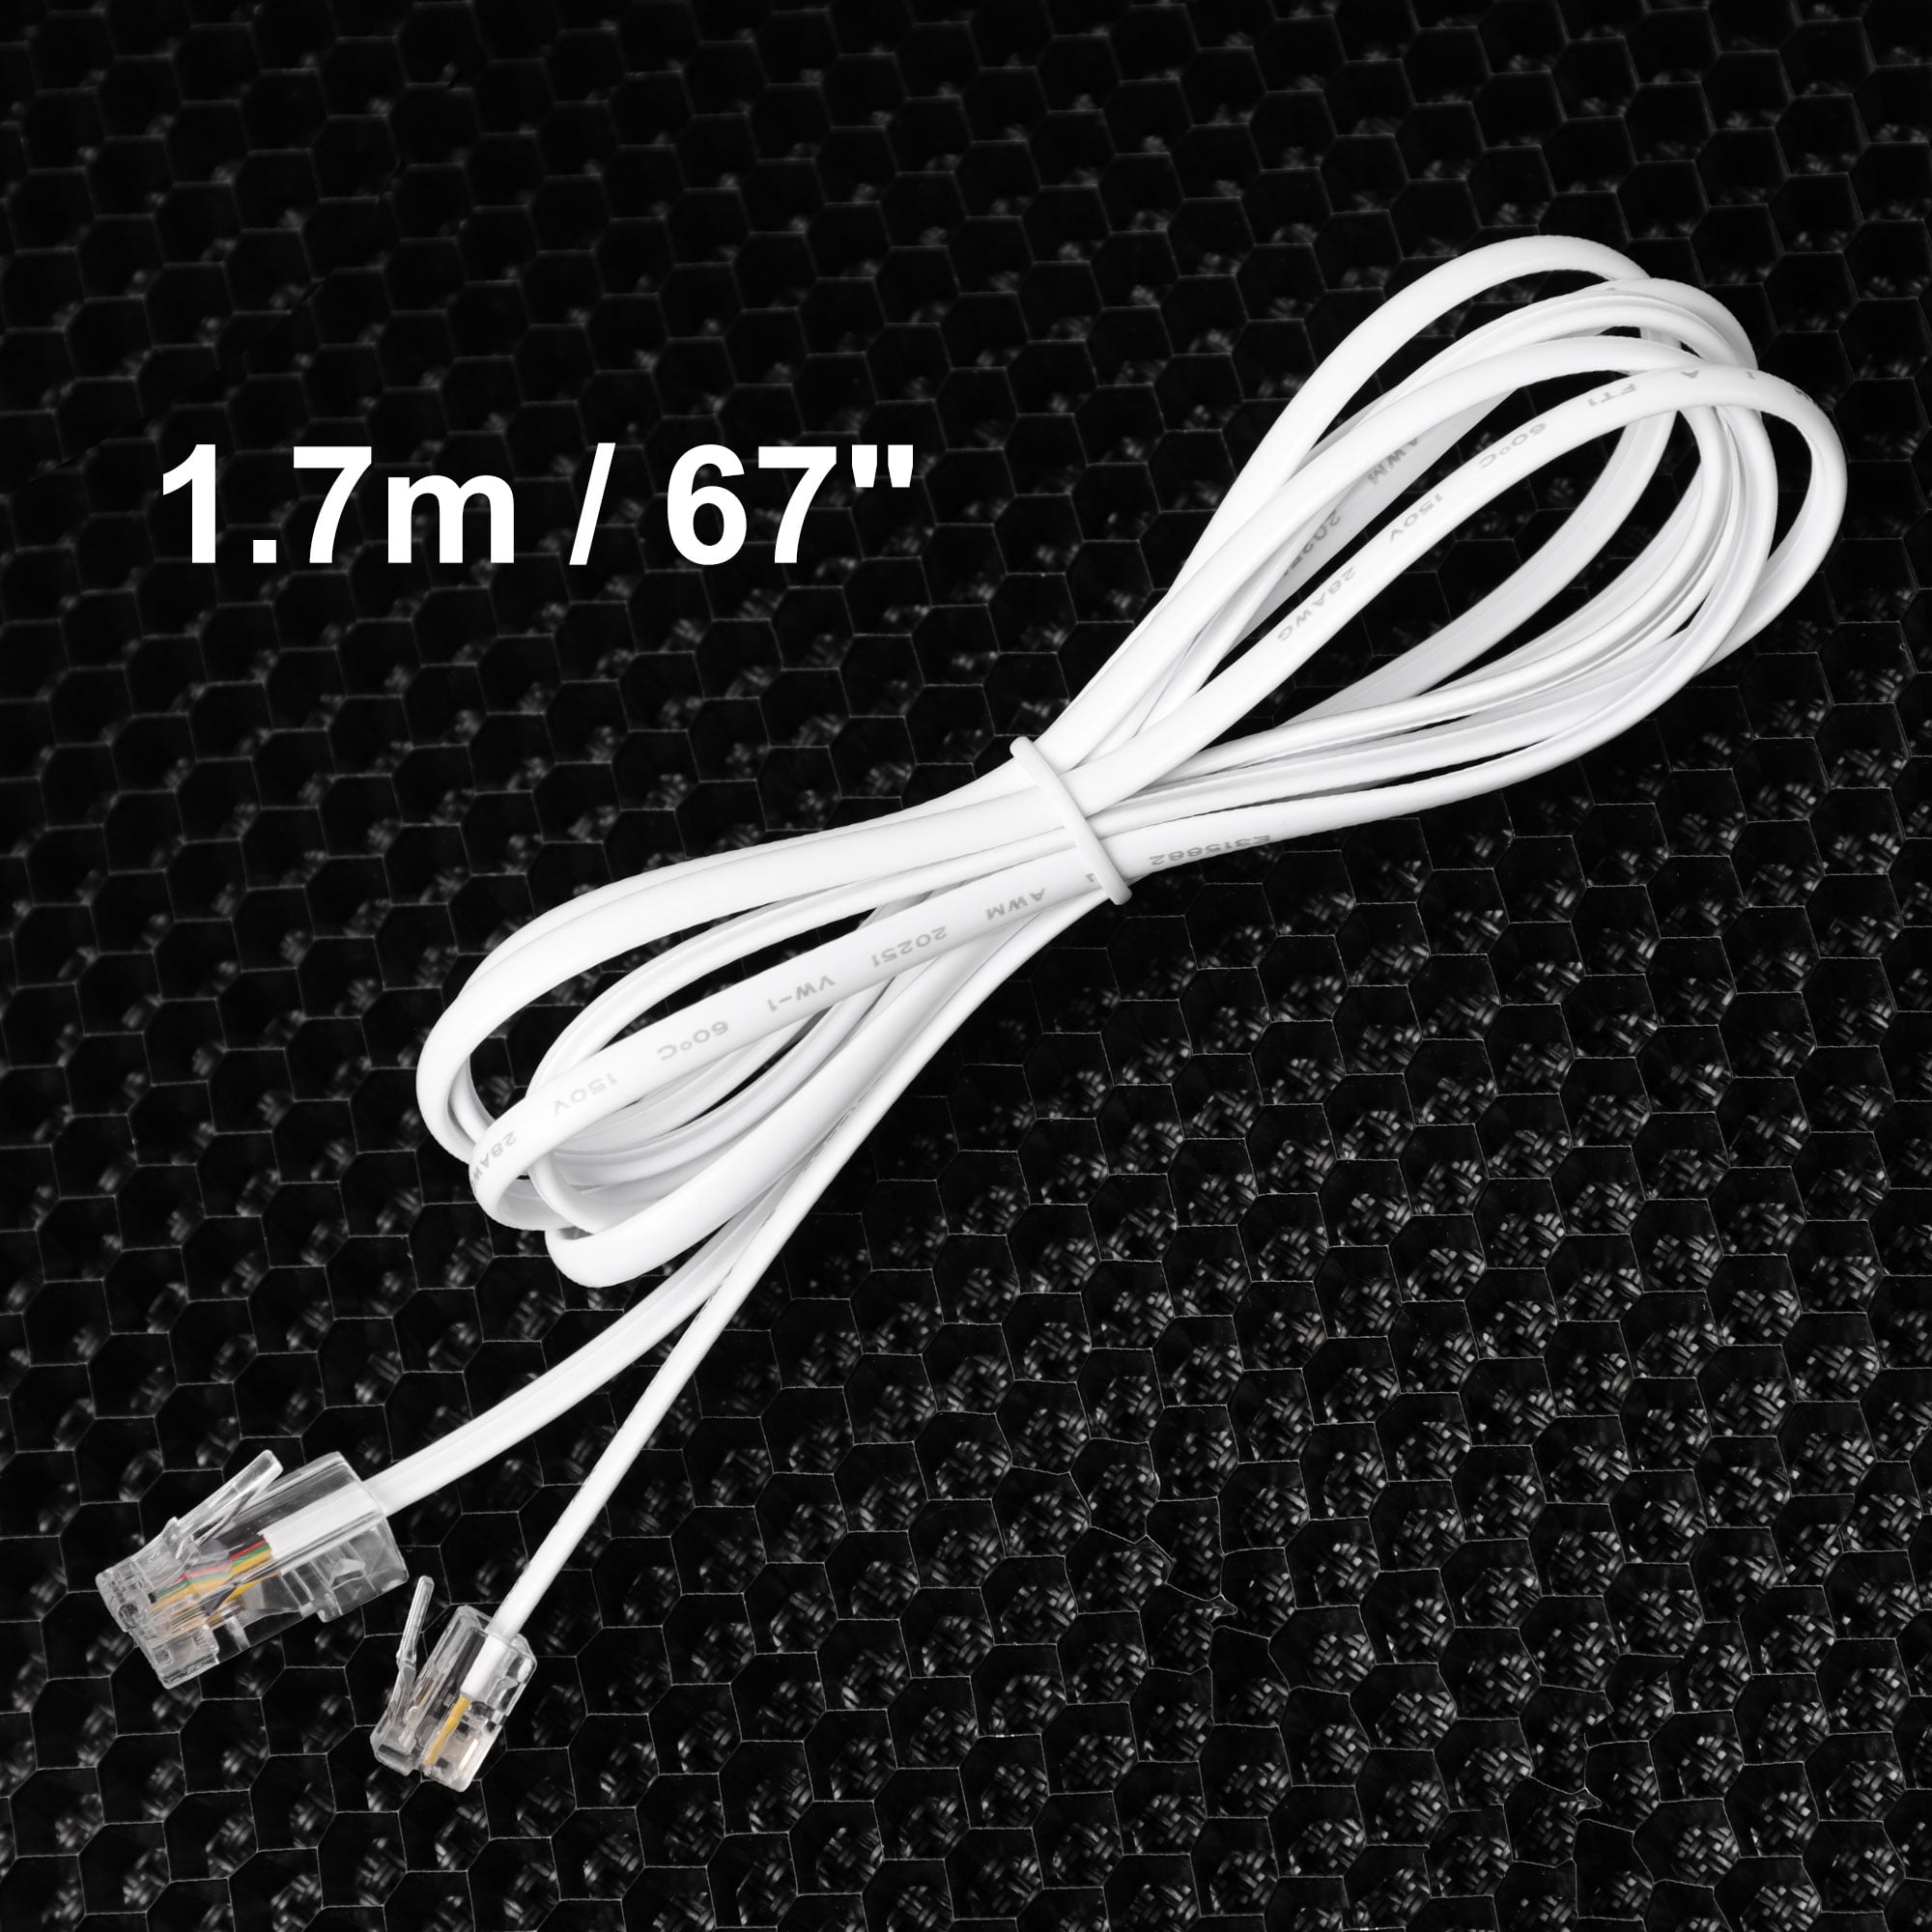 10m RJ11 to RJ45 Cable RJ11 to RJ45 Cable Phone Telephone Cord RJ11 6P4C to  RJ45 8P8C Connector Plug Cable for Landline 